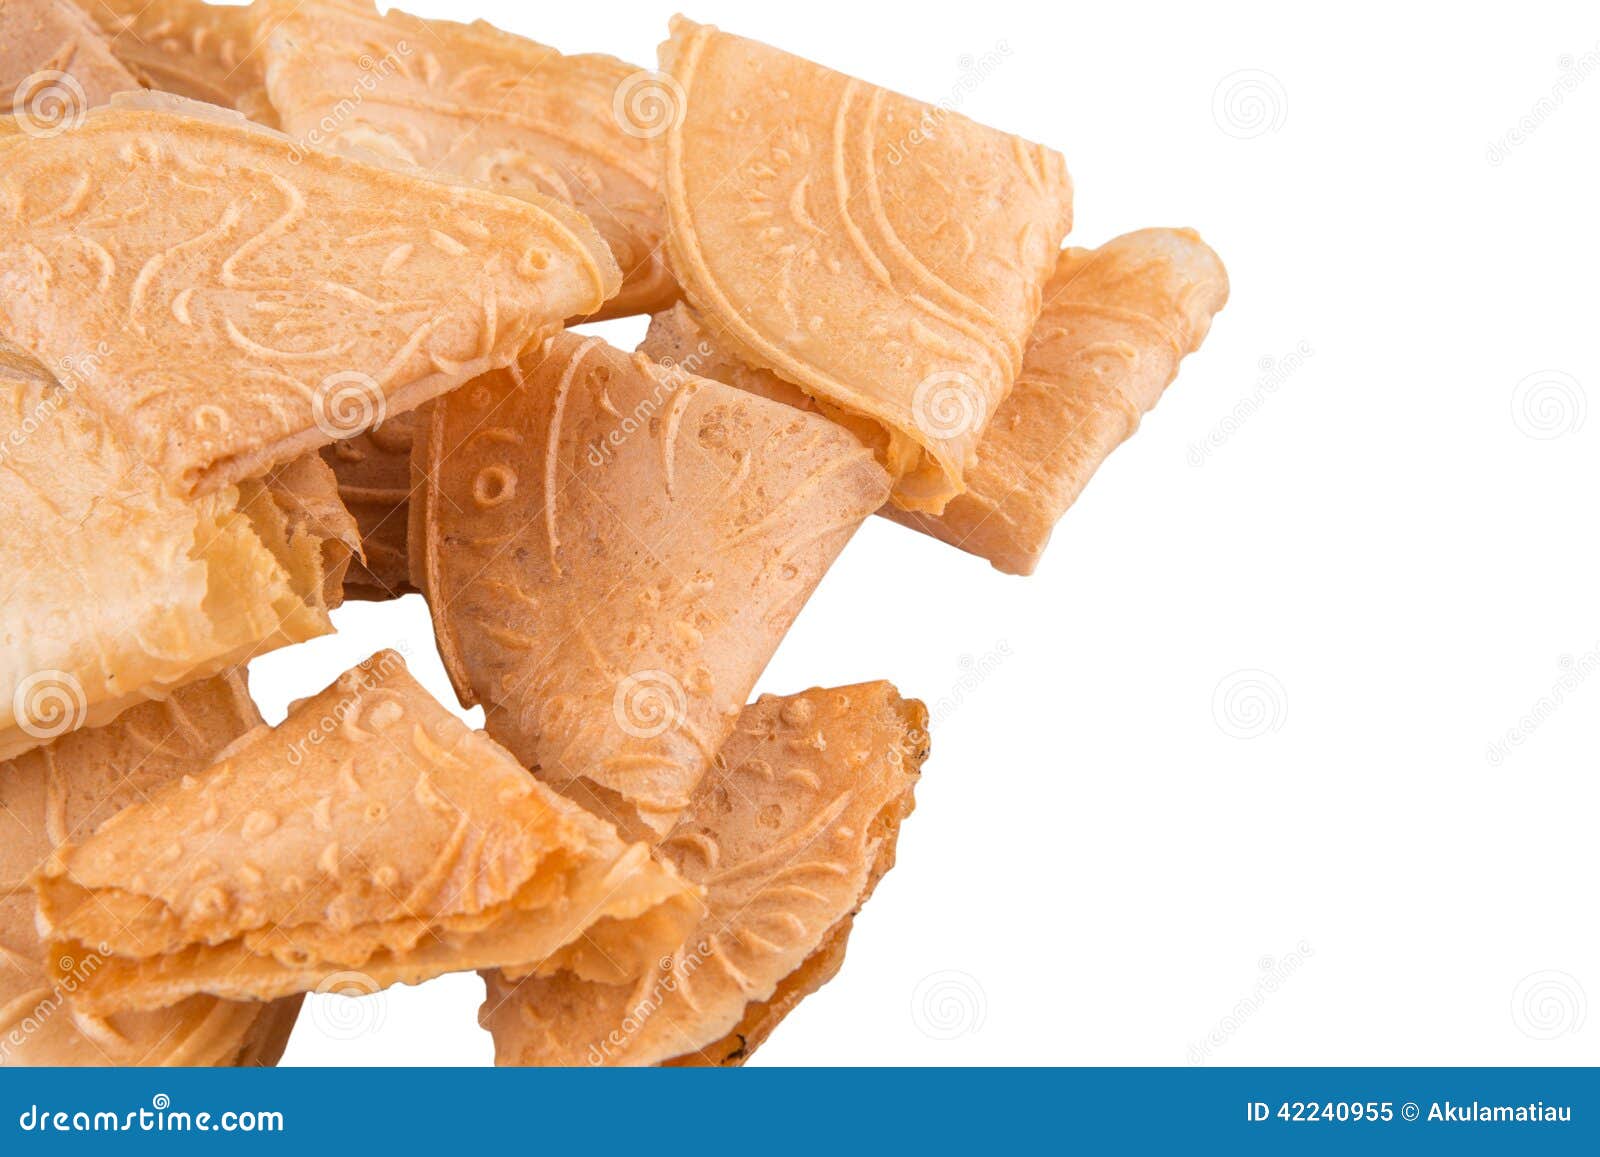 Chinese Love Letter Biscuit V Stock Image - Image of food 